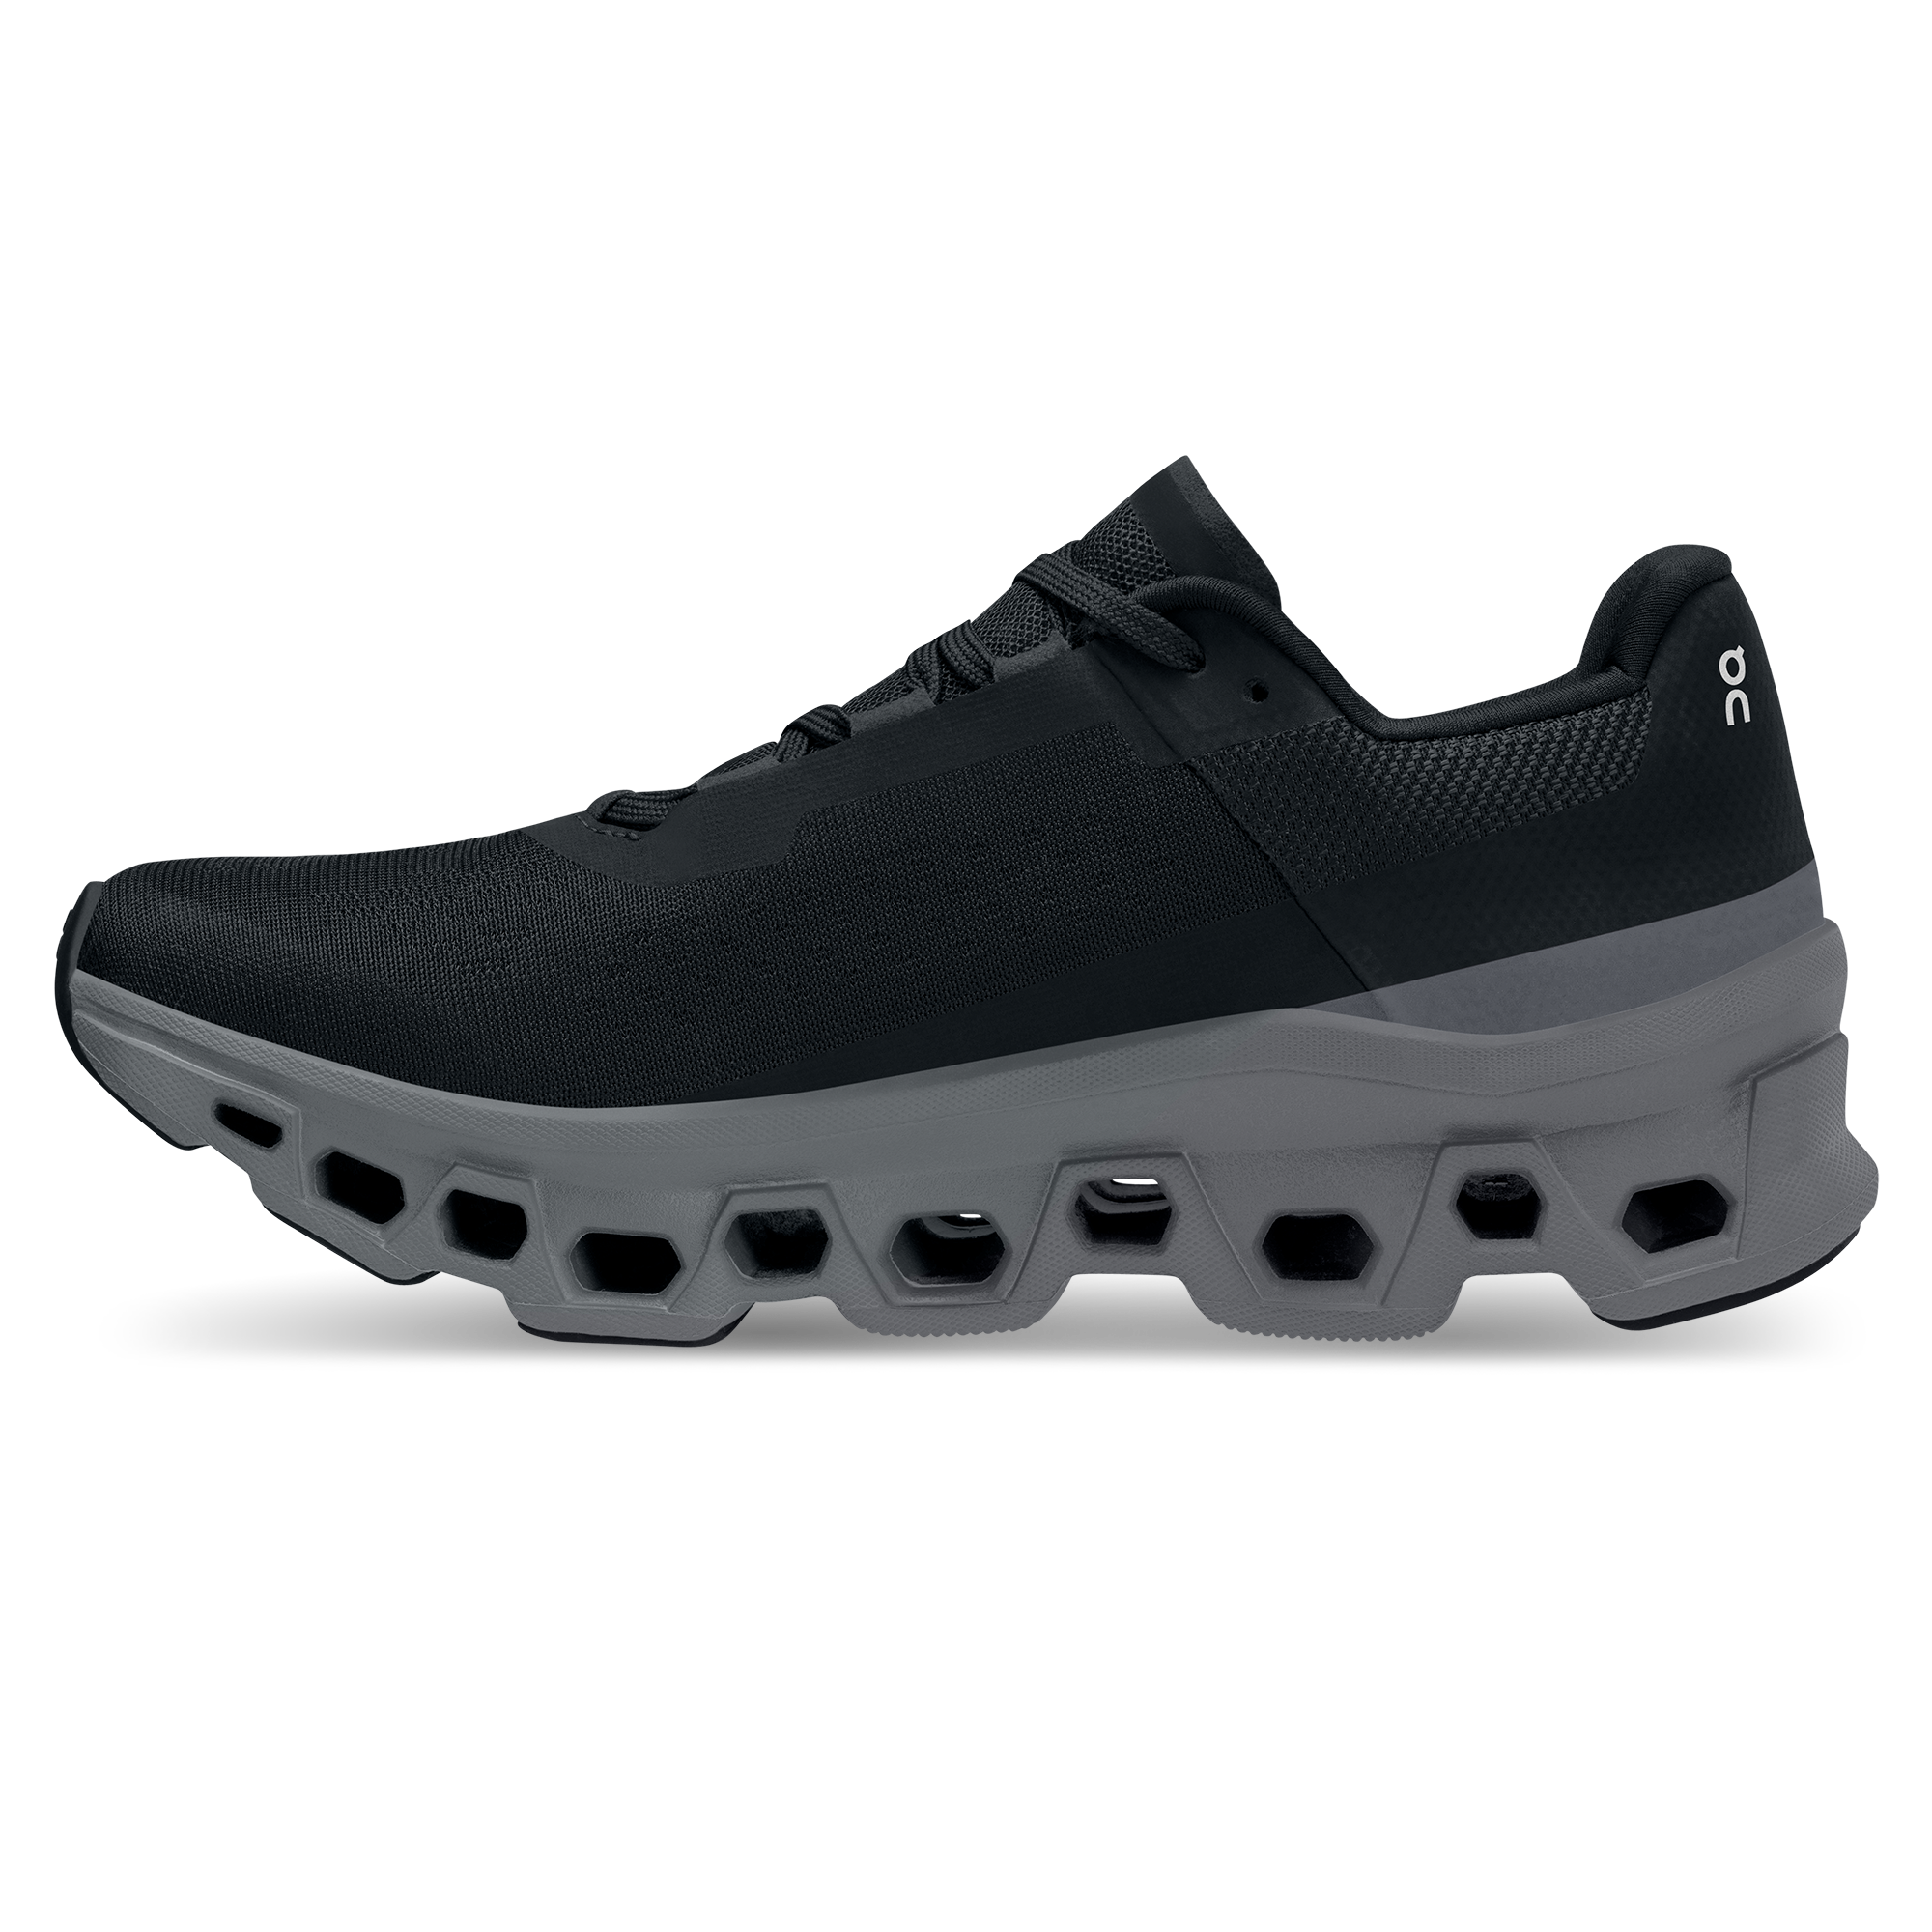 Women's Cloudmonster | Black | On United States